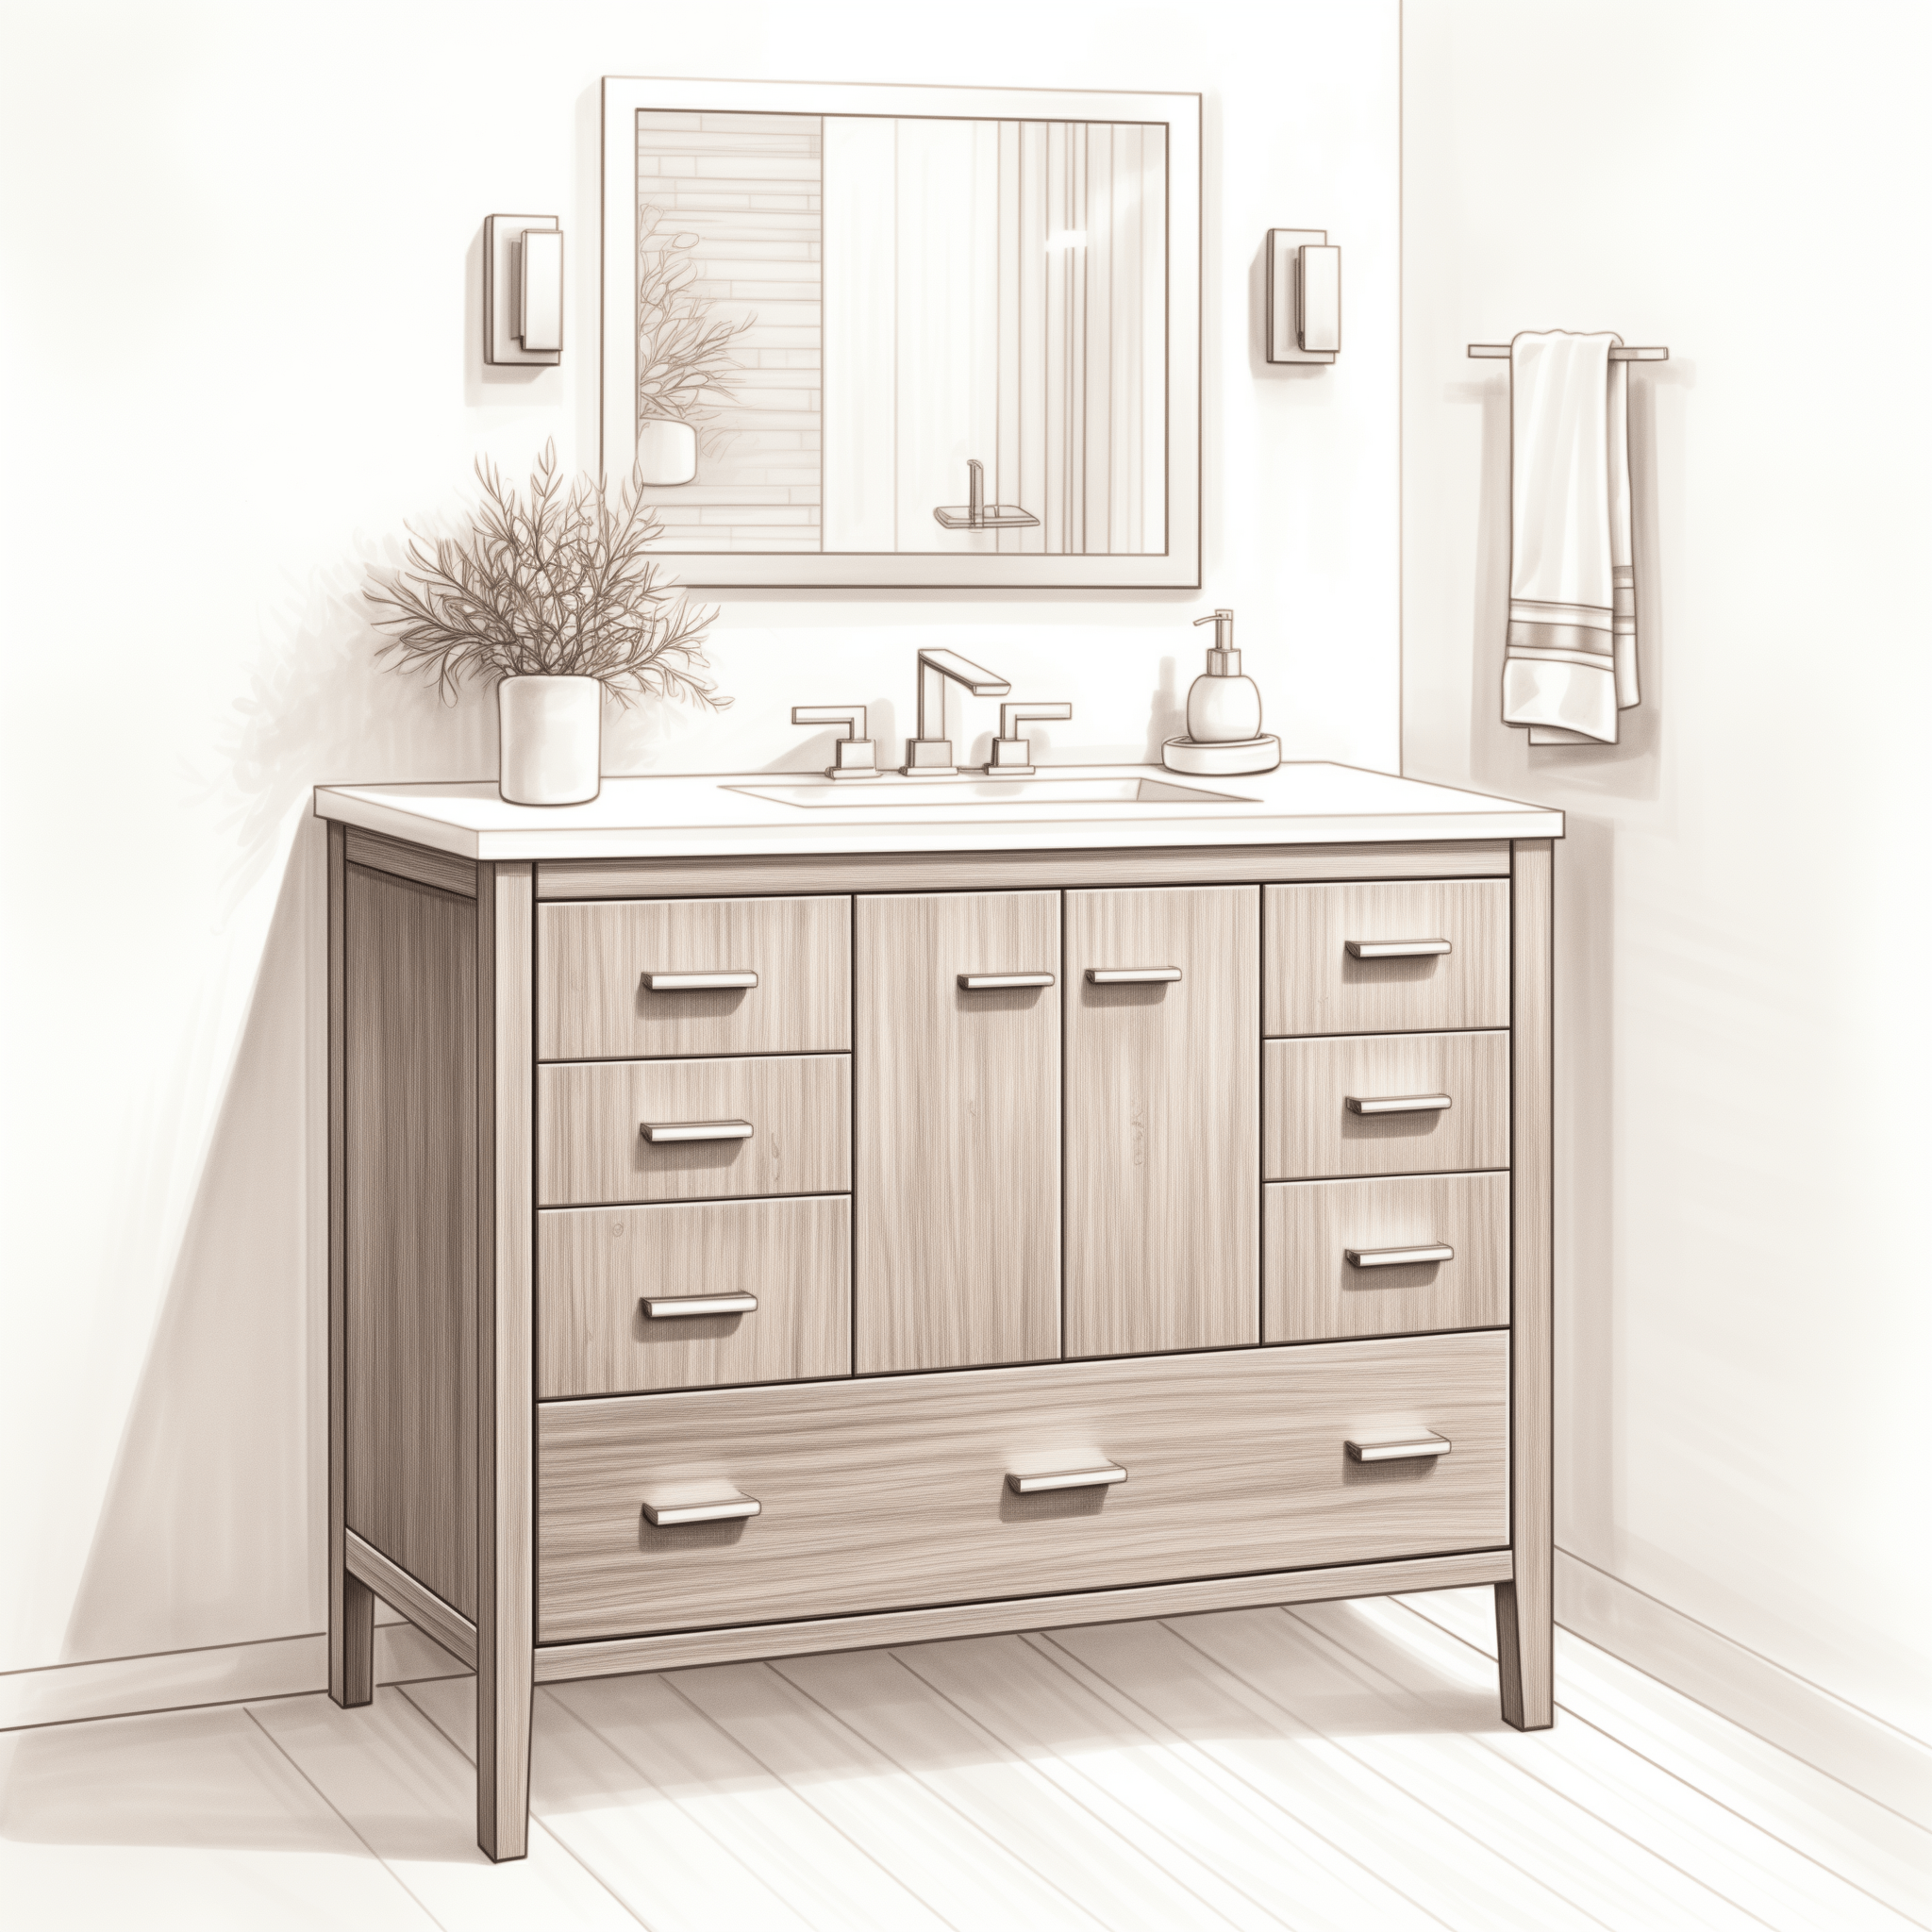 A pencil drawing of a Small Bathroom Vanity showing space efficiency